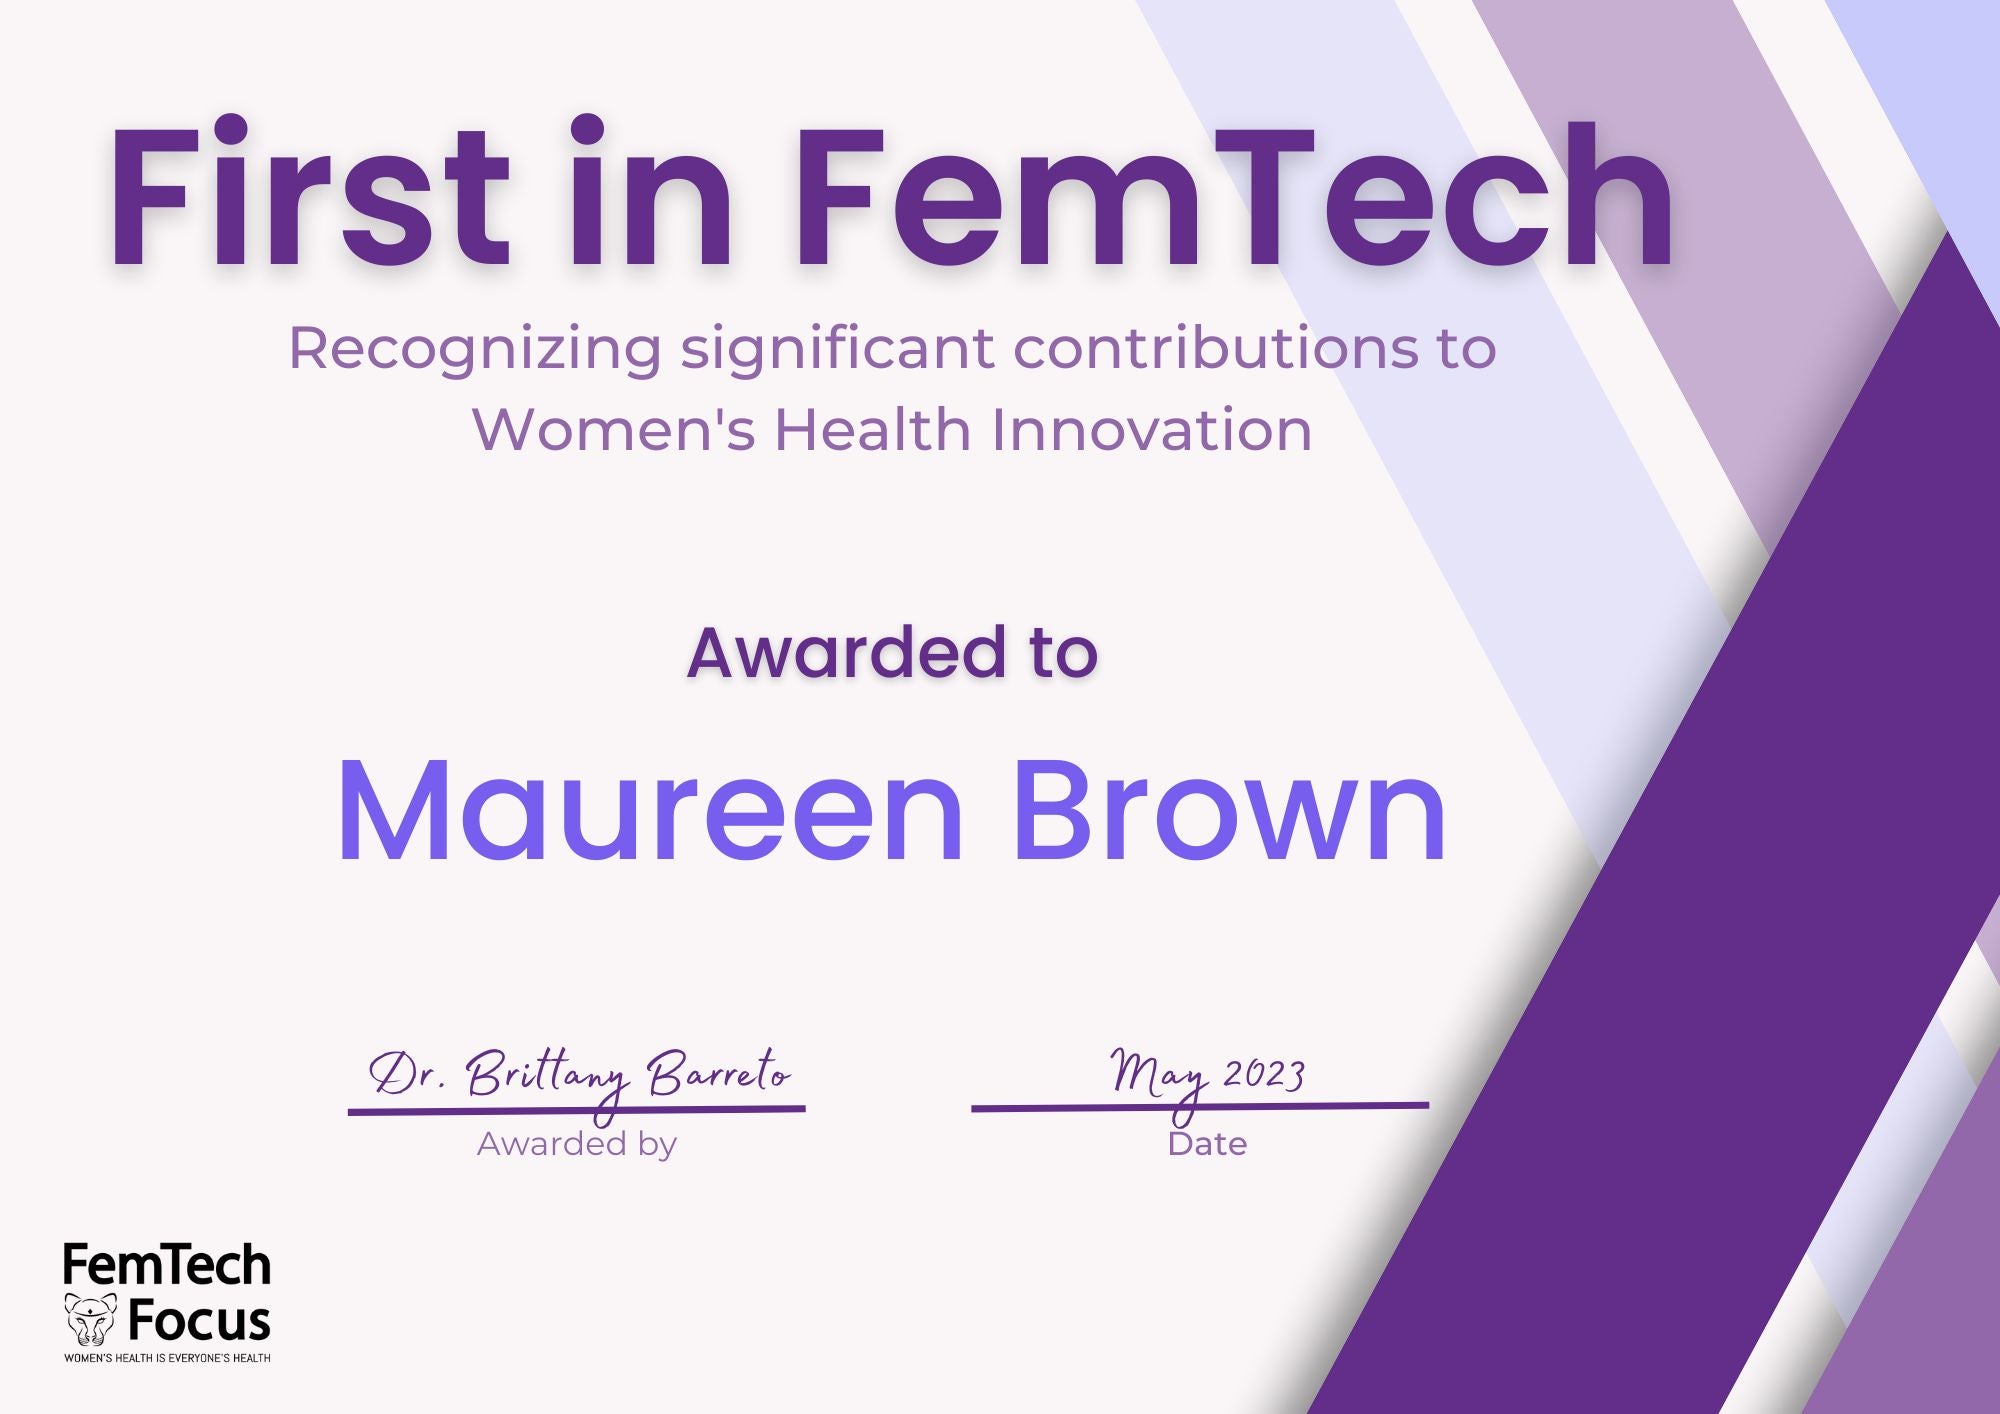 Mosie Baby Co-founder Maureen Brown has been selected as a recipient of the First in FemTech Award!